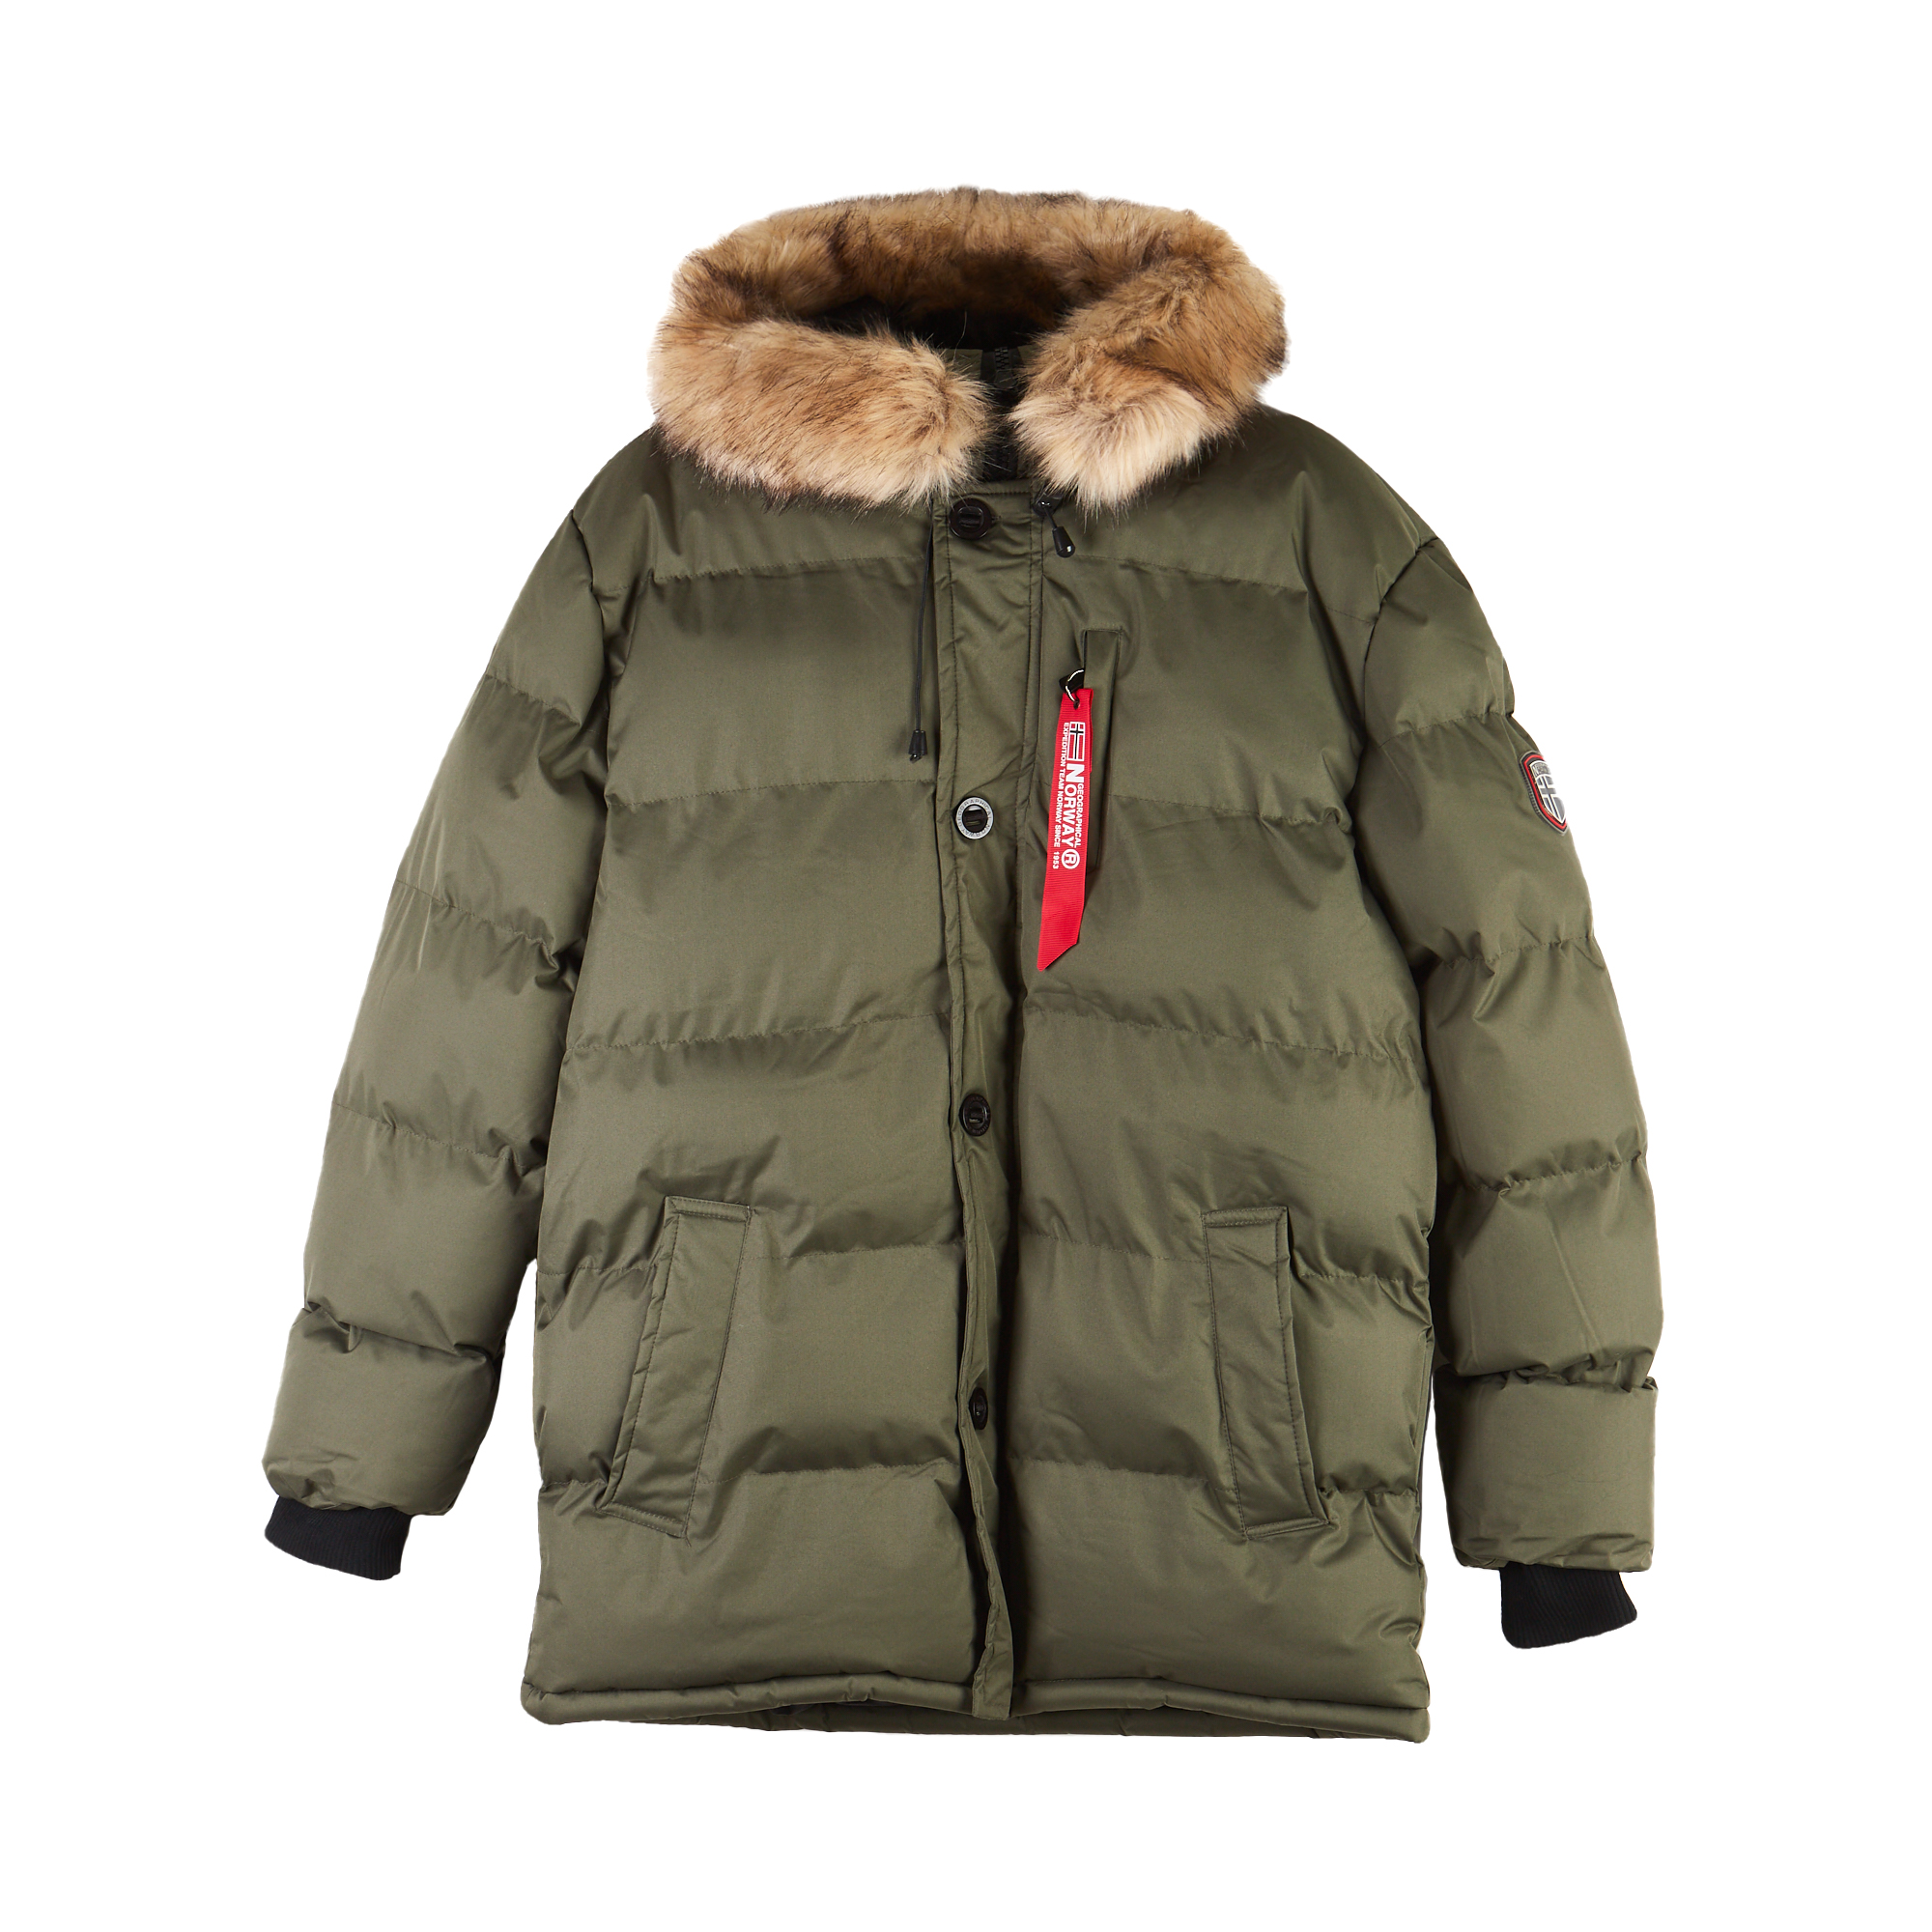 http://blog.thestyleoutlets.es/wp-content/uploads/2022/01/GEOGRAPHICAL-NORWAY.-chaqueton-hombre.-225-129.jpg